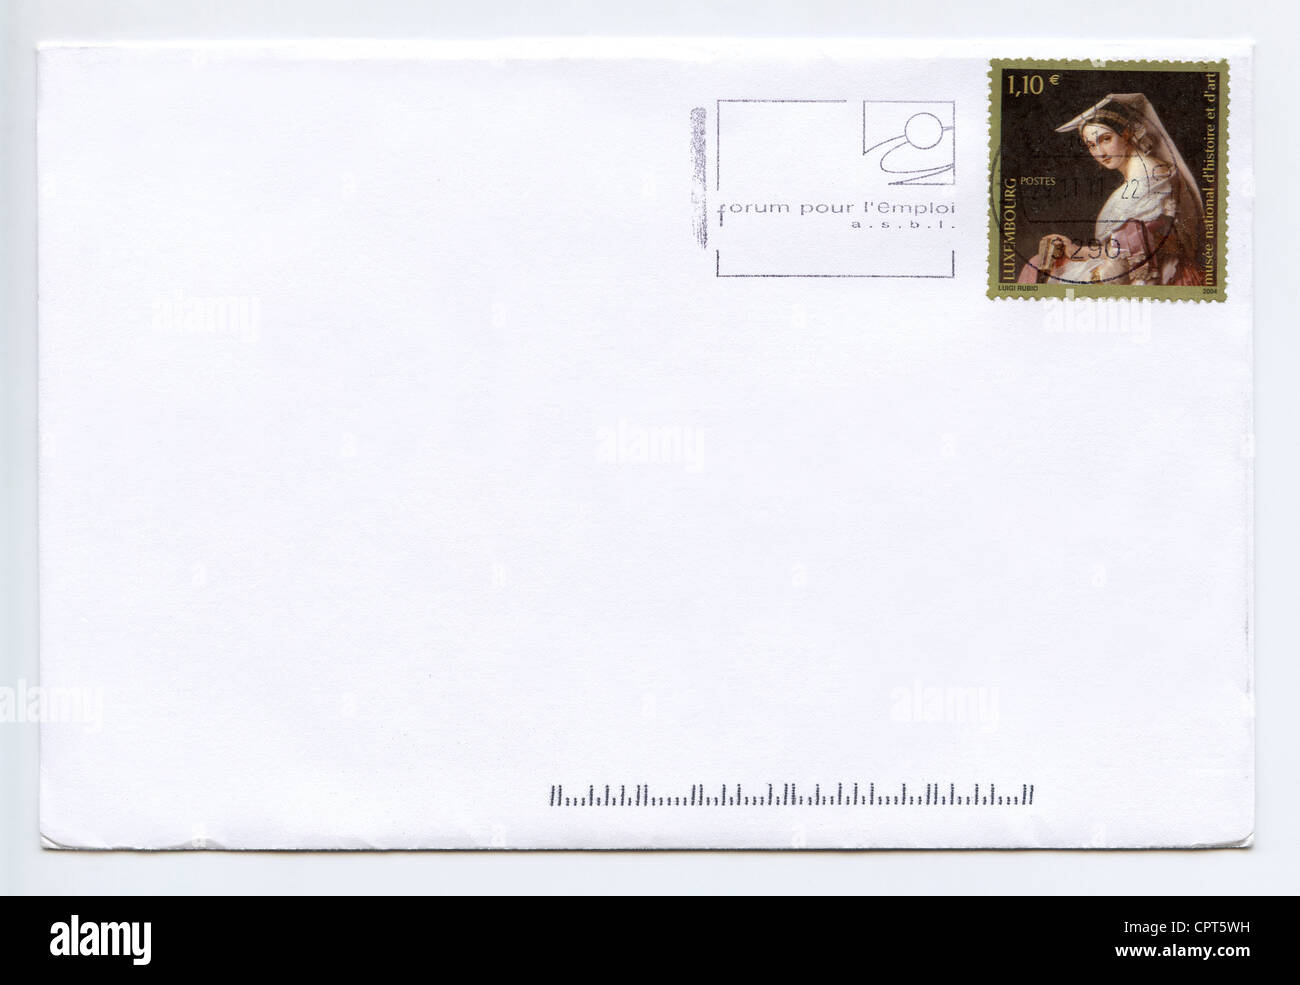 Luxembourg postage on letter Stock Photo